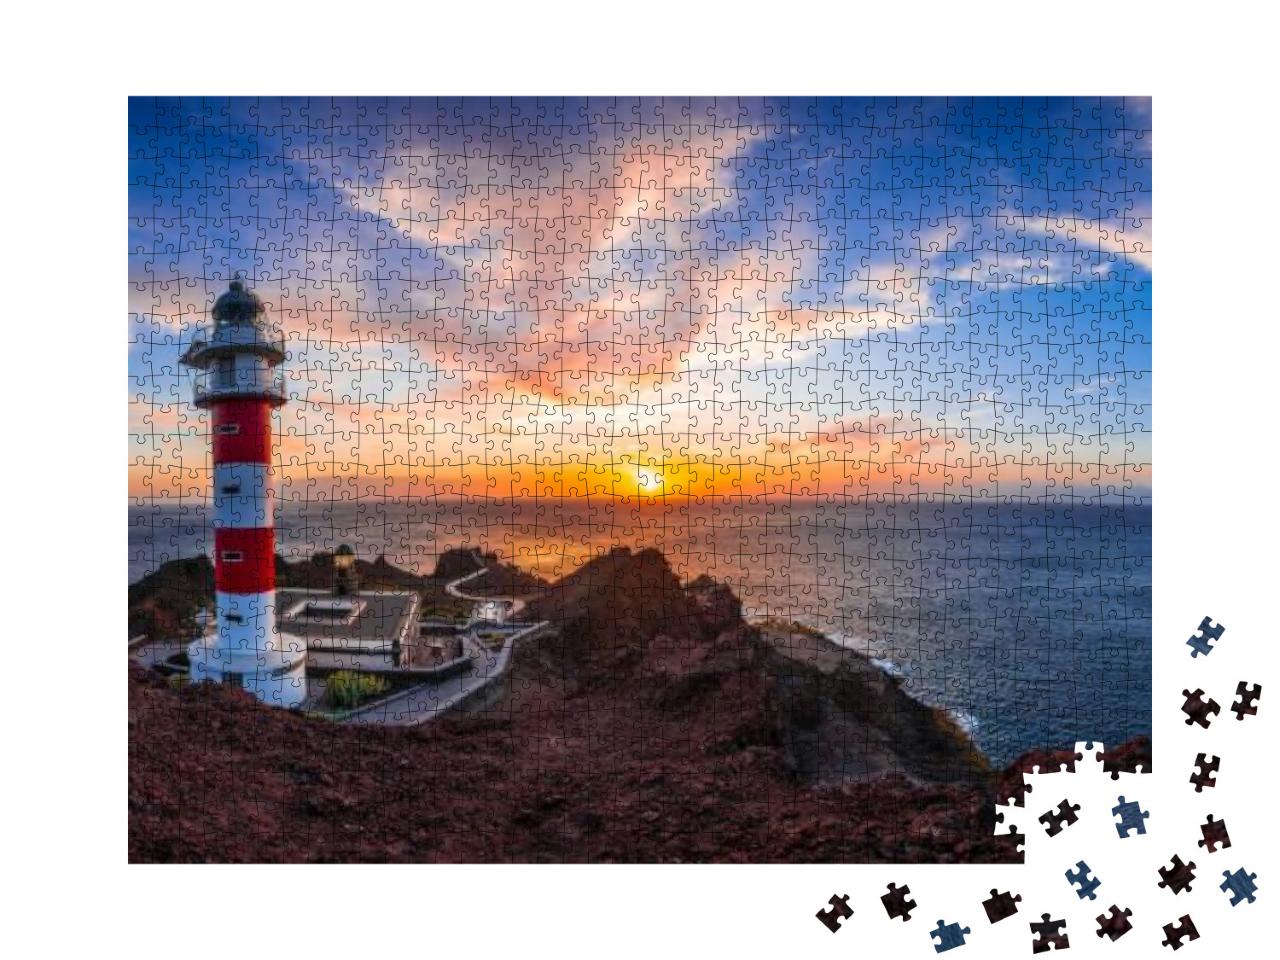 Panoramic View of a Sunset At the Lighthouse of Punta De... Jigsaw Puzzle with 1000 pieces